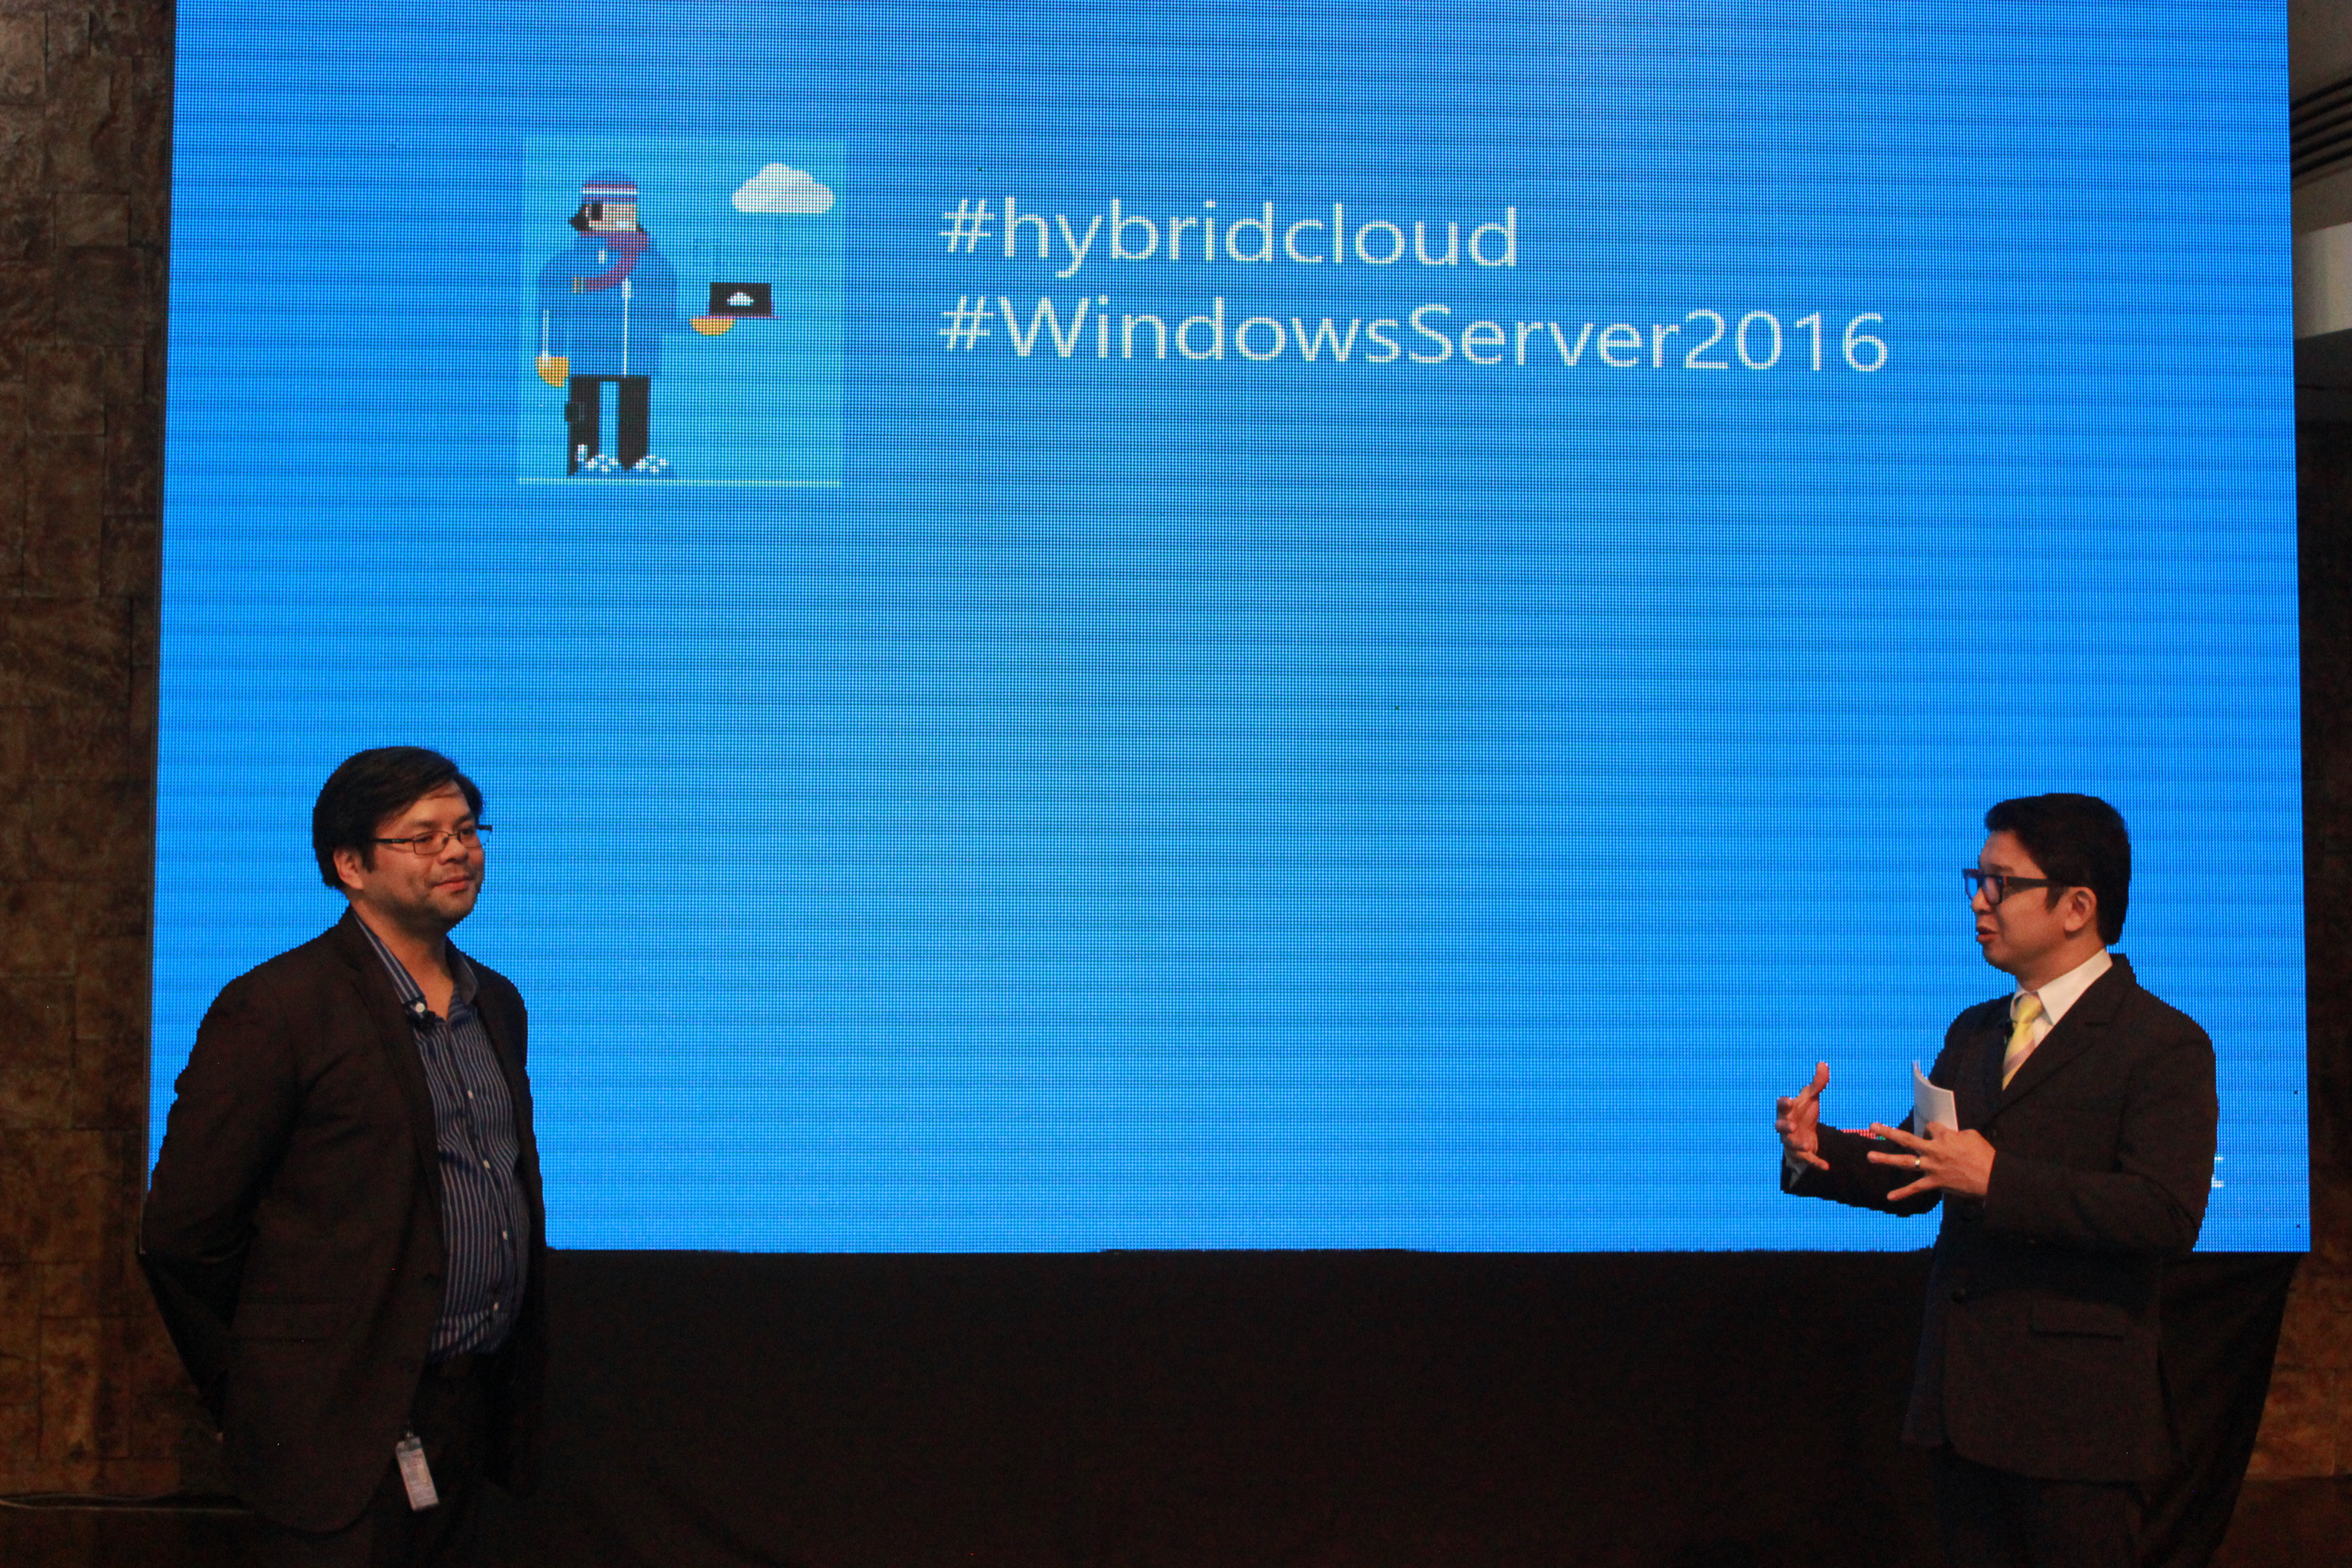 Herns Hermida, Cloud and Enterprise Lead of Microsoft Philippines speaks about the importance of Hybrid Cloud for businesses to host and entrepreneur RJ Ledesma